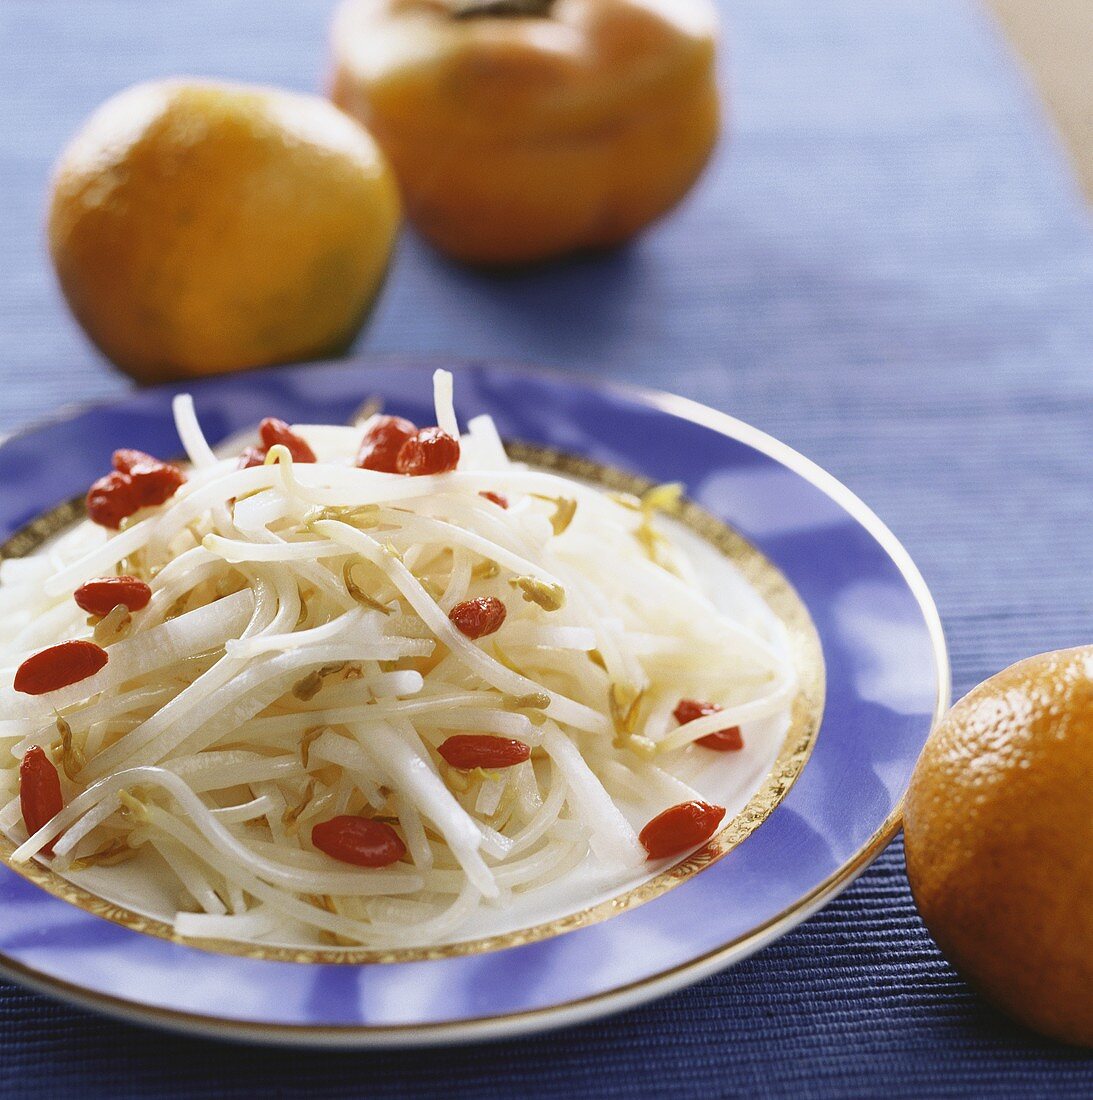 Bean sprouts with yam root and wolfberries